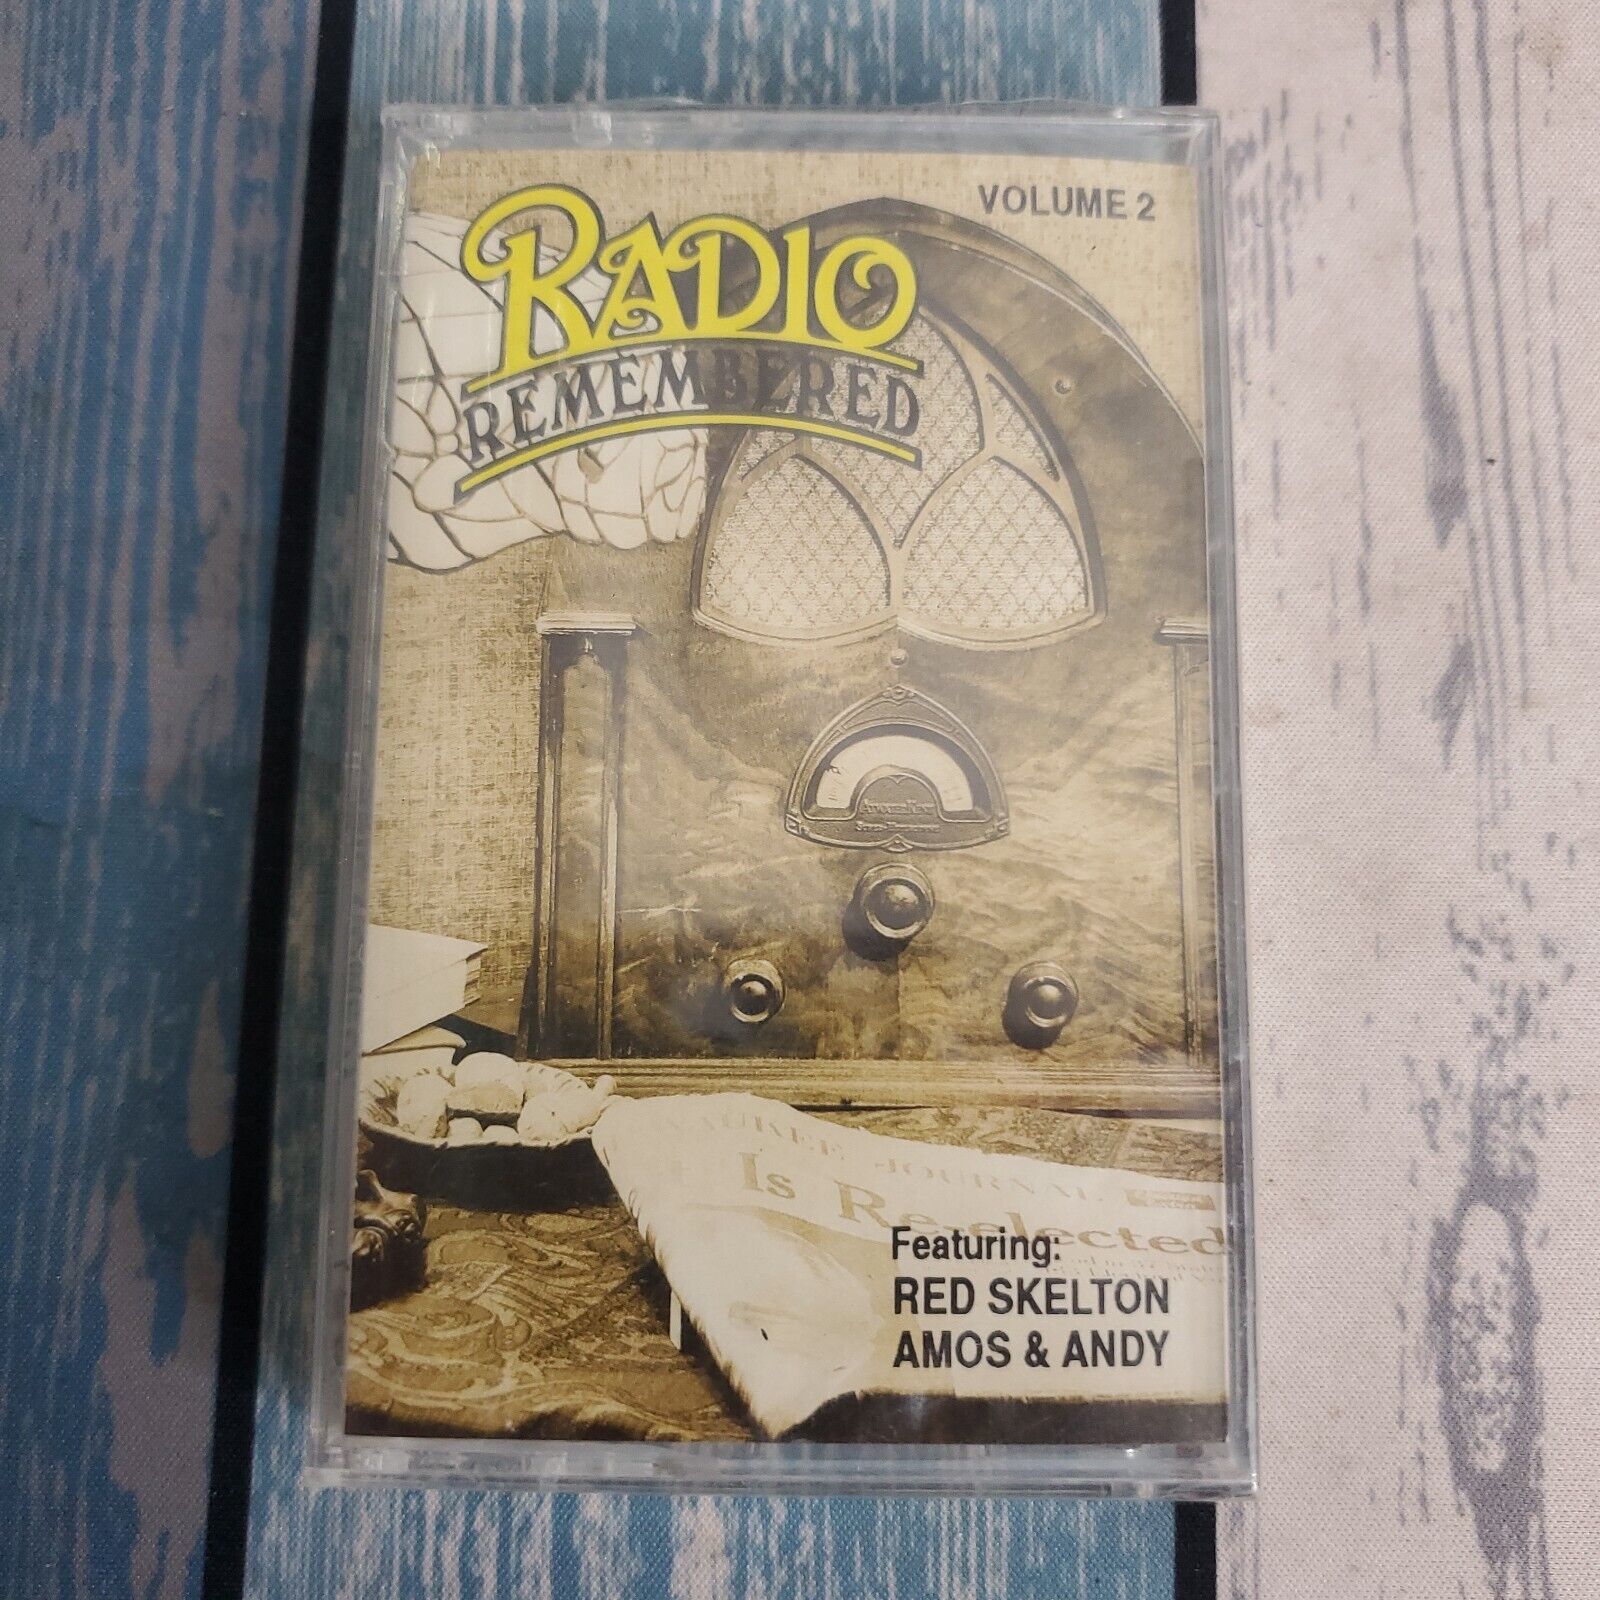 Radio Remembered Volume 2 Cassette Tape 1992 Red Skeleton Amos & Andy NEW SEALED